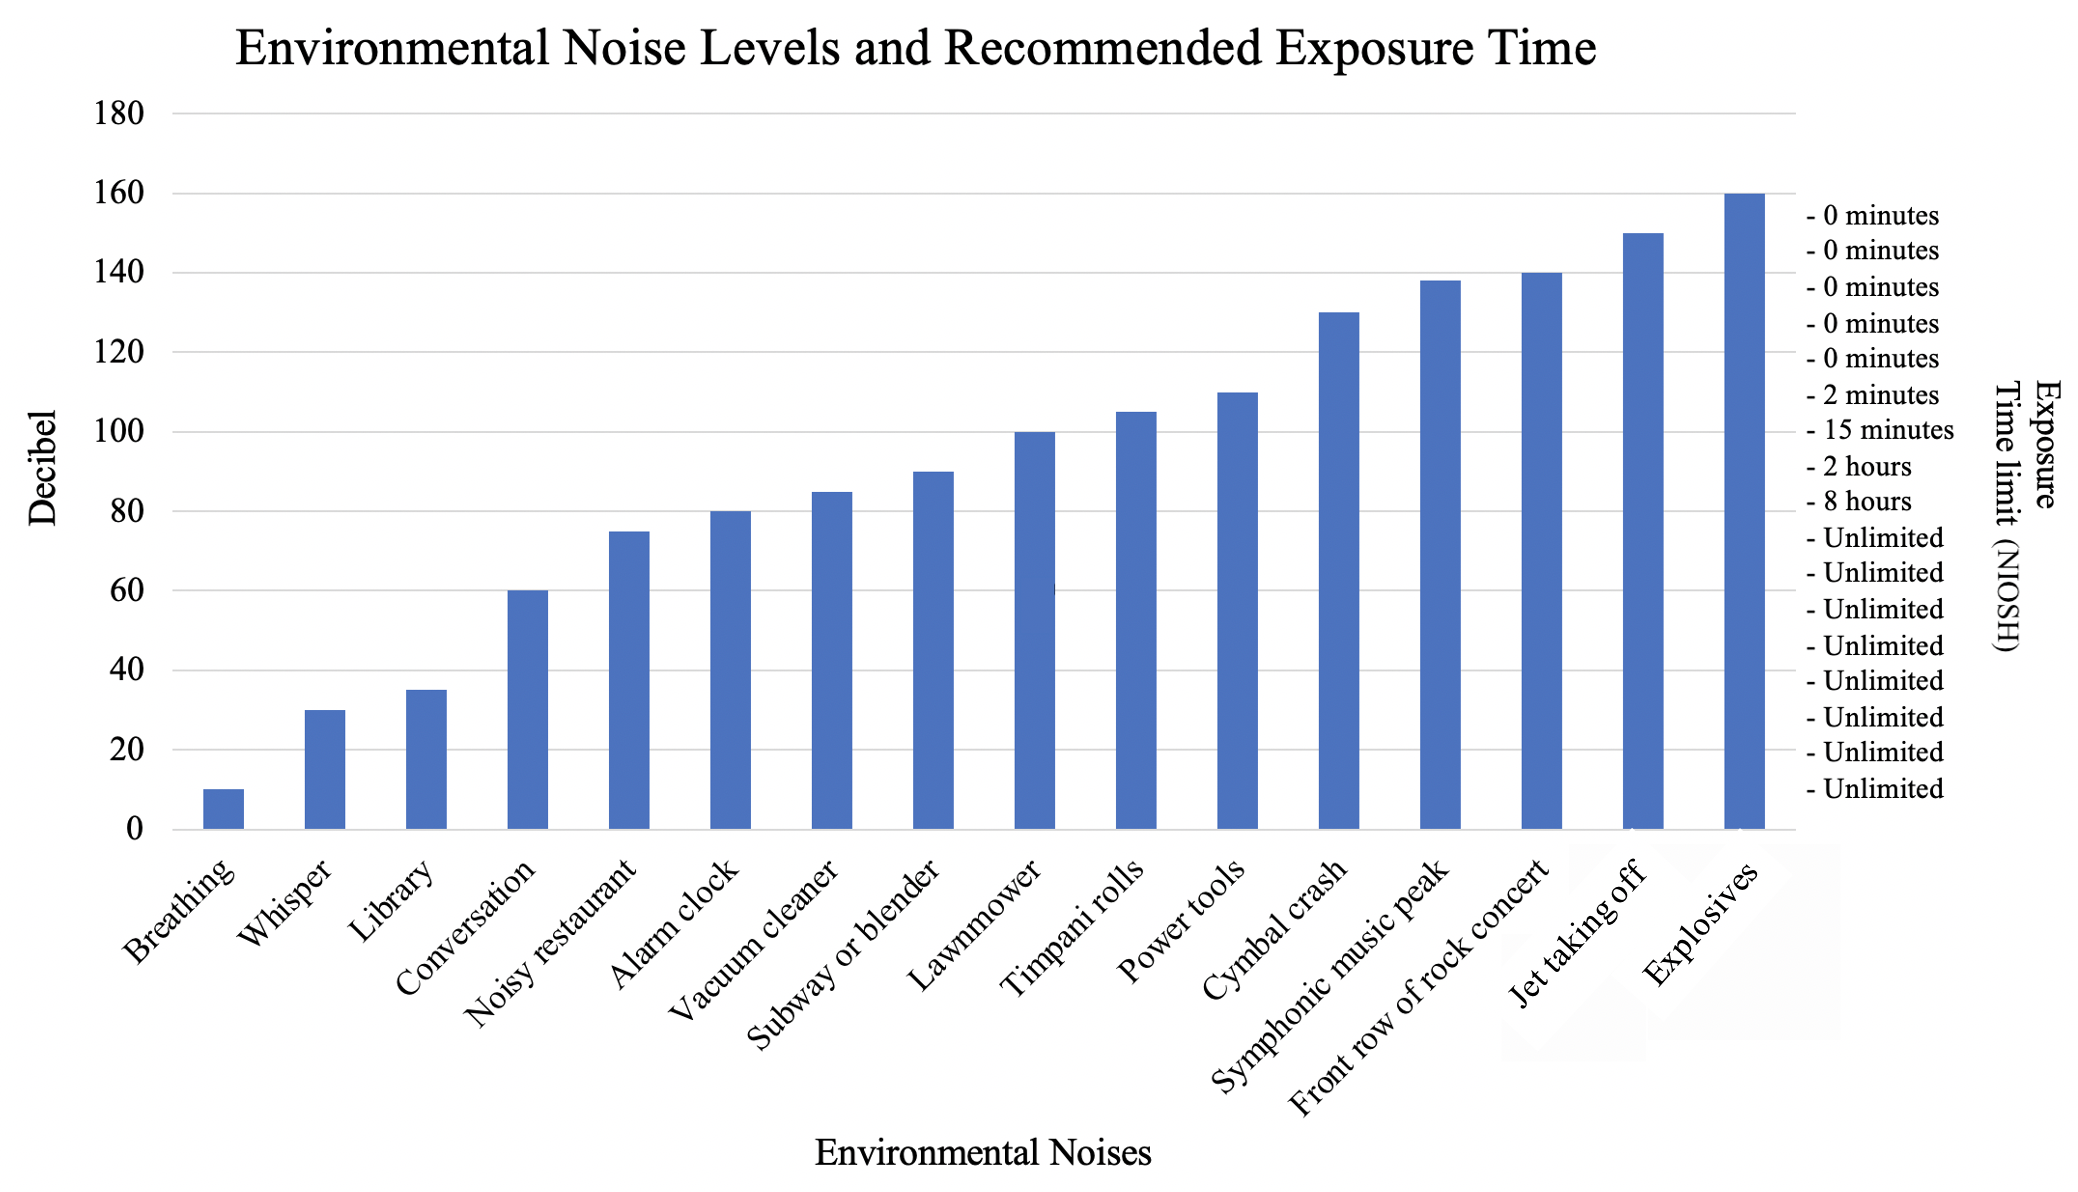 Environmental Noise and Exposure Time graph